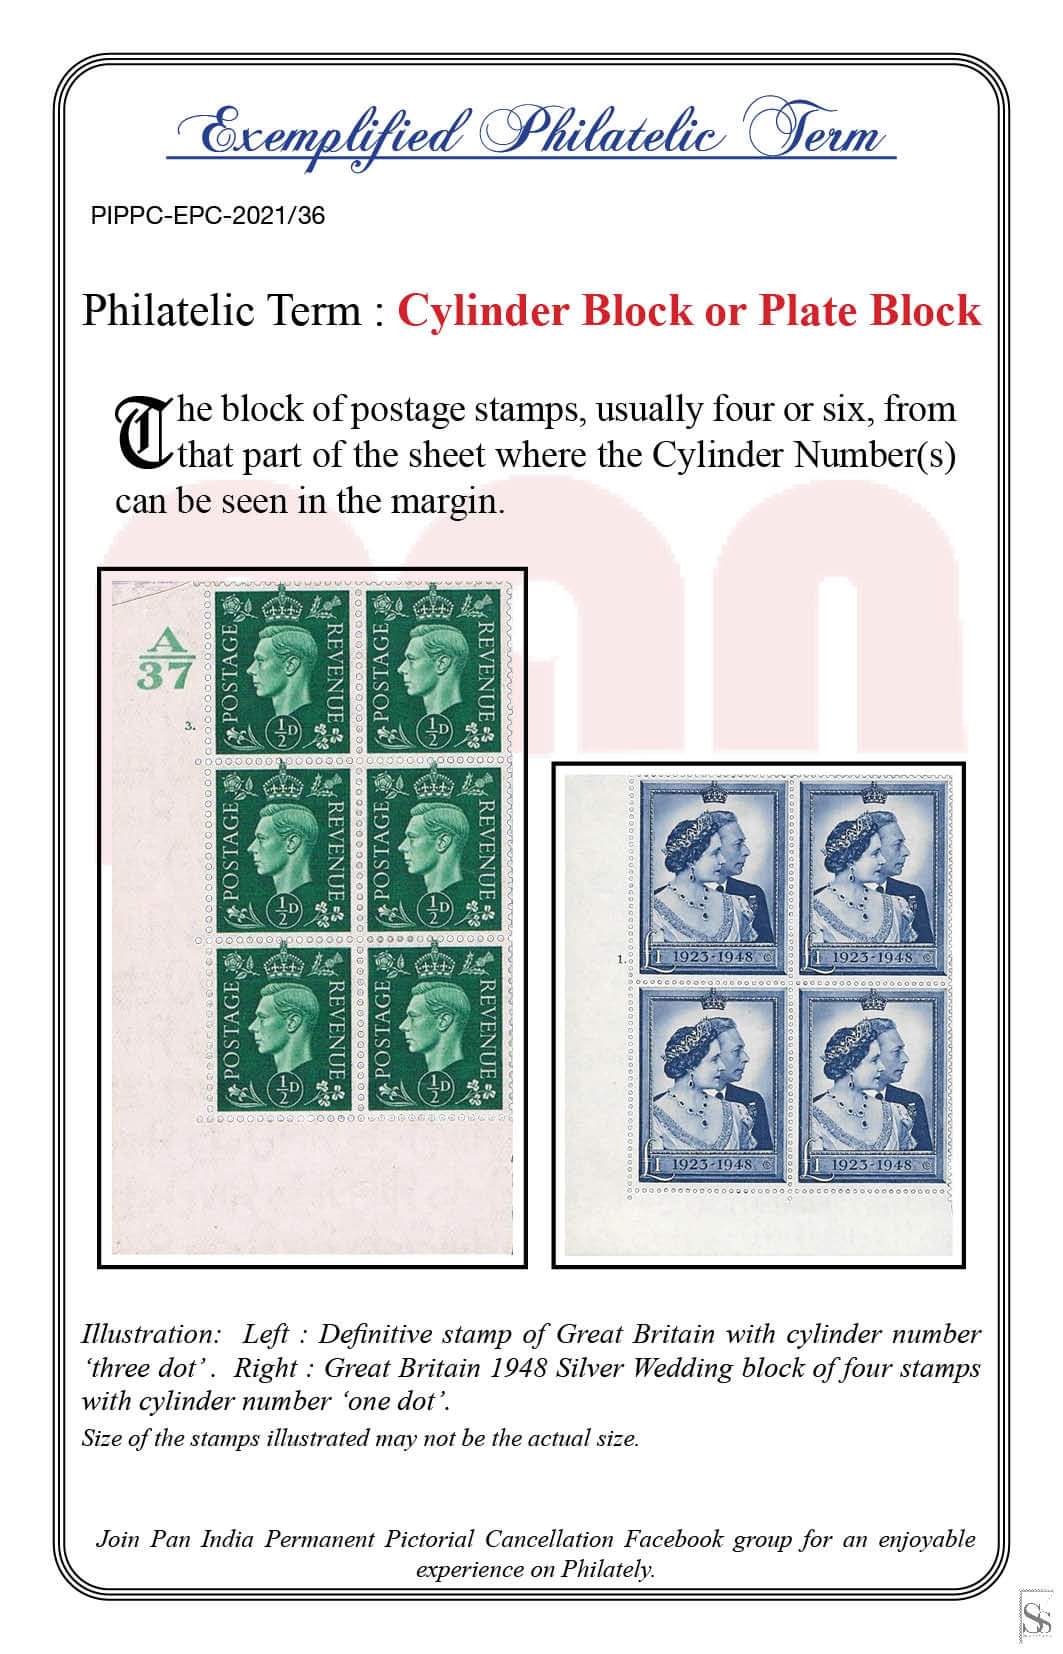 36. Today's Exemplified Philatelic term-Cylinder Block or Plate Block